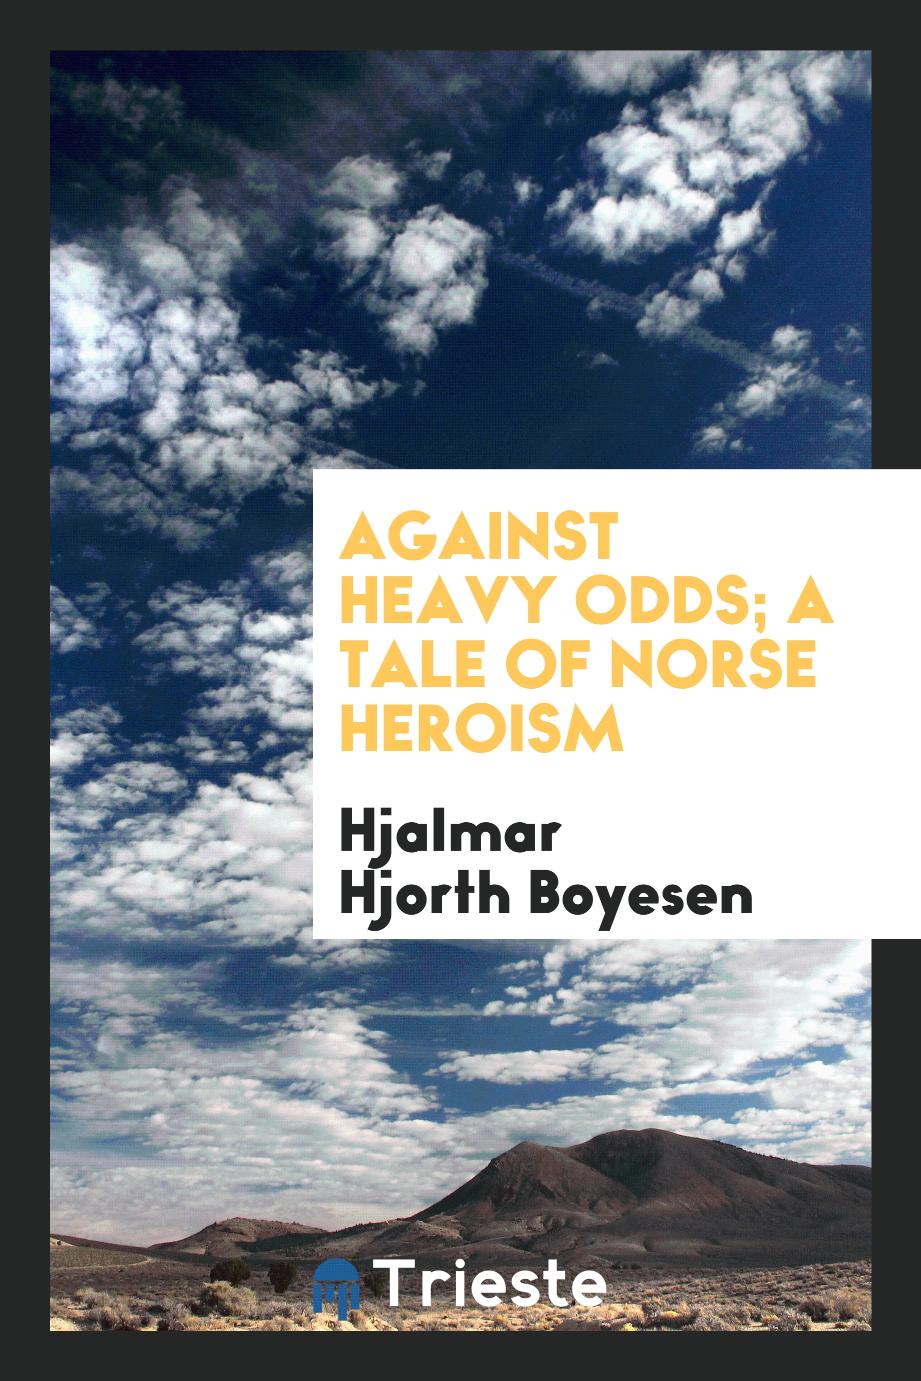 Against heavy odds; a tale of Norse heroism